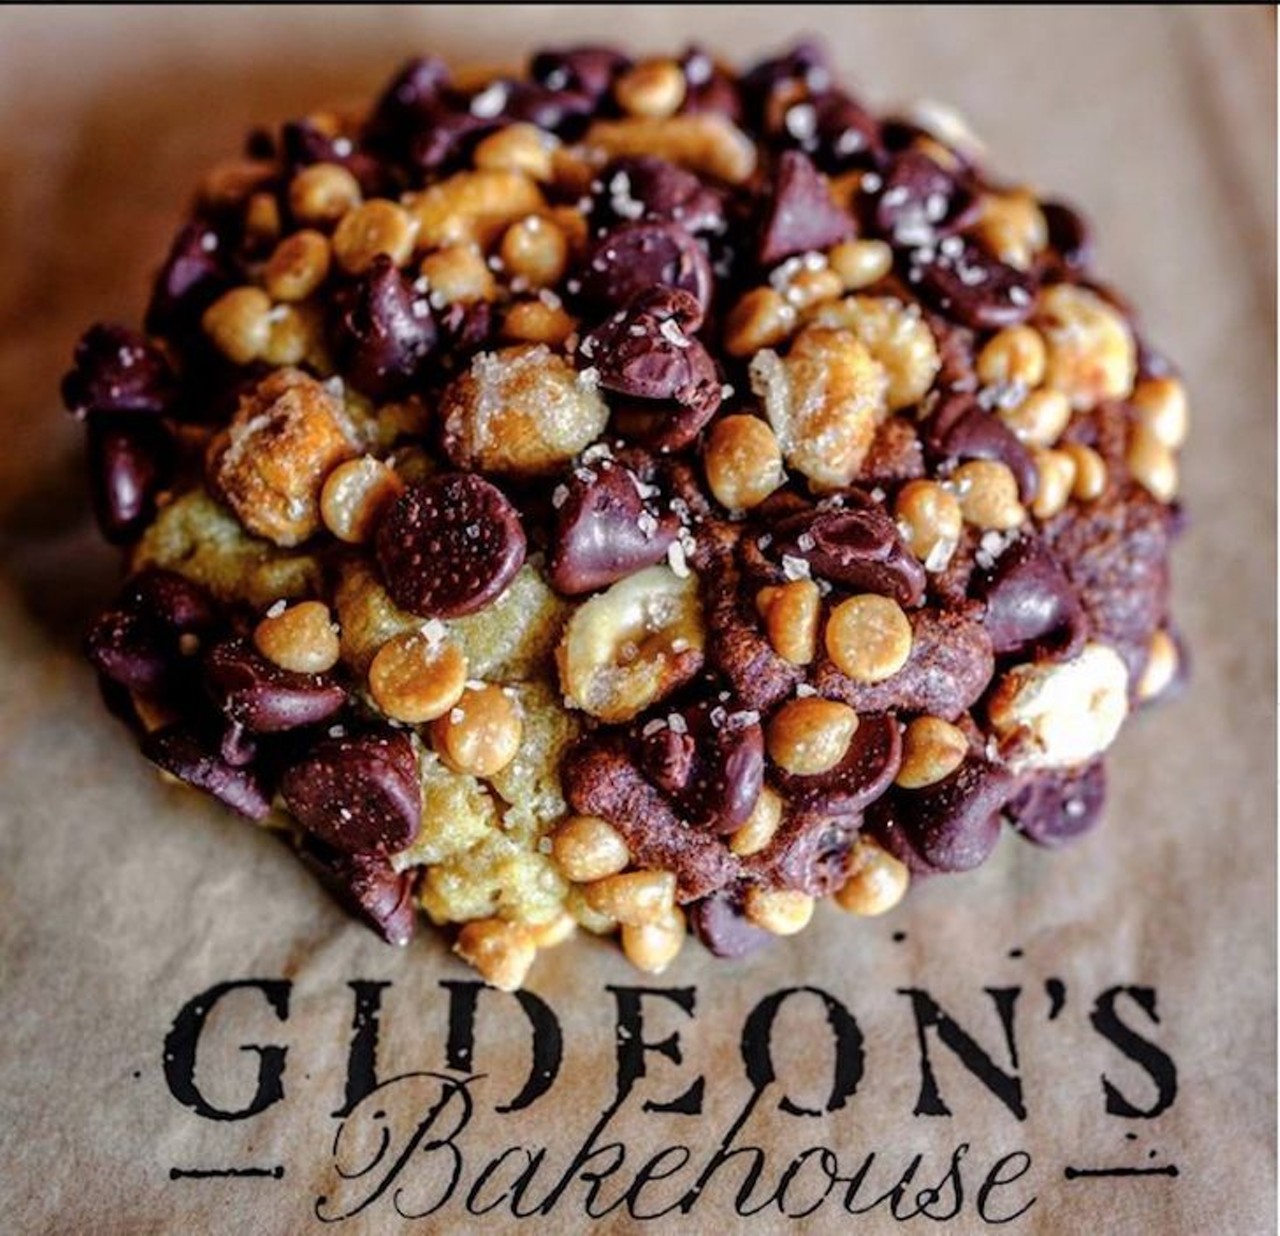 Gideon&#146;s Bakehouse: Half-pound cookie  
3201 Corrine Drive
Get your appetite ready for these half-pound cookies. Start off with their classic chocolate chip and then (if you've got the guts) try one of their special daily cookie selections. You might want to get there early, because their cookies always sell out. 
Photo via Facebook/Gideon&#146;s Bakehouse